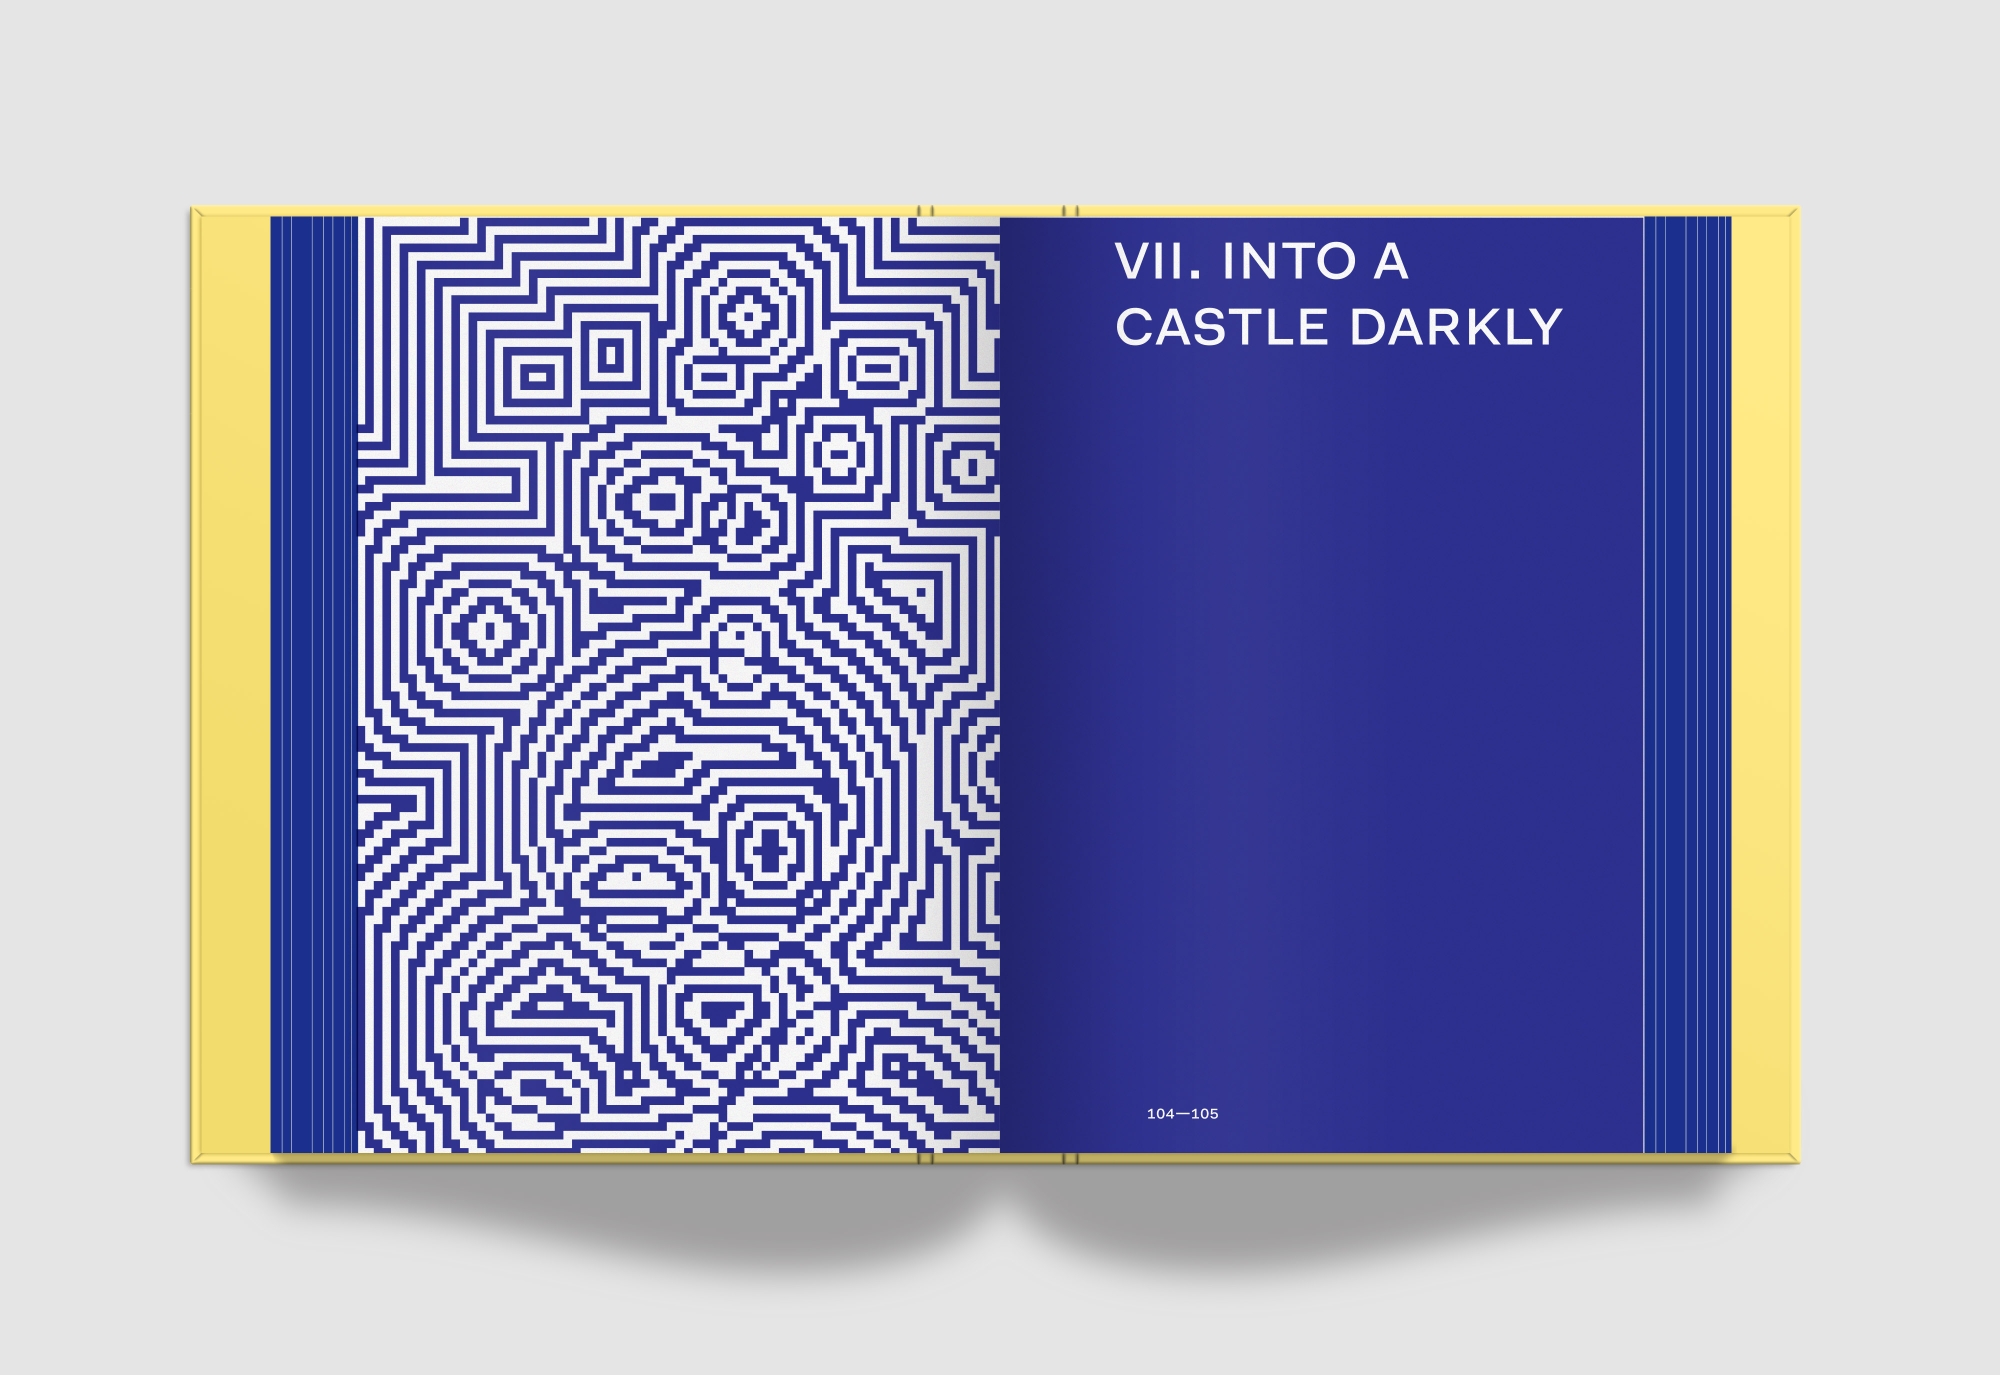 Concept design mockup for The Secret History of Mac Gaming chapter opener page spread, showing a full-page blue-tinged monochrome abstract artwork alongside a blue page with white text at the top reading "VII. INTO A CASTLE DARKLY". The page edges are blue and the inside cover is yellow.